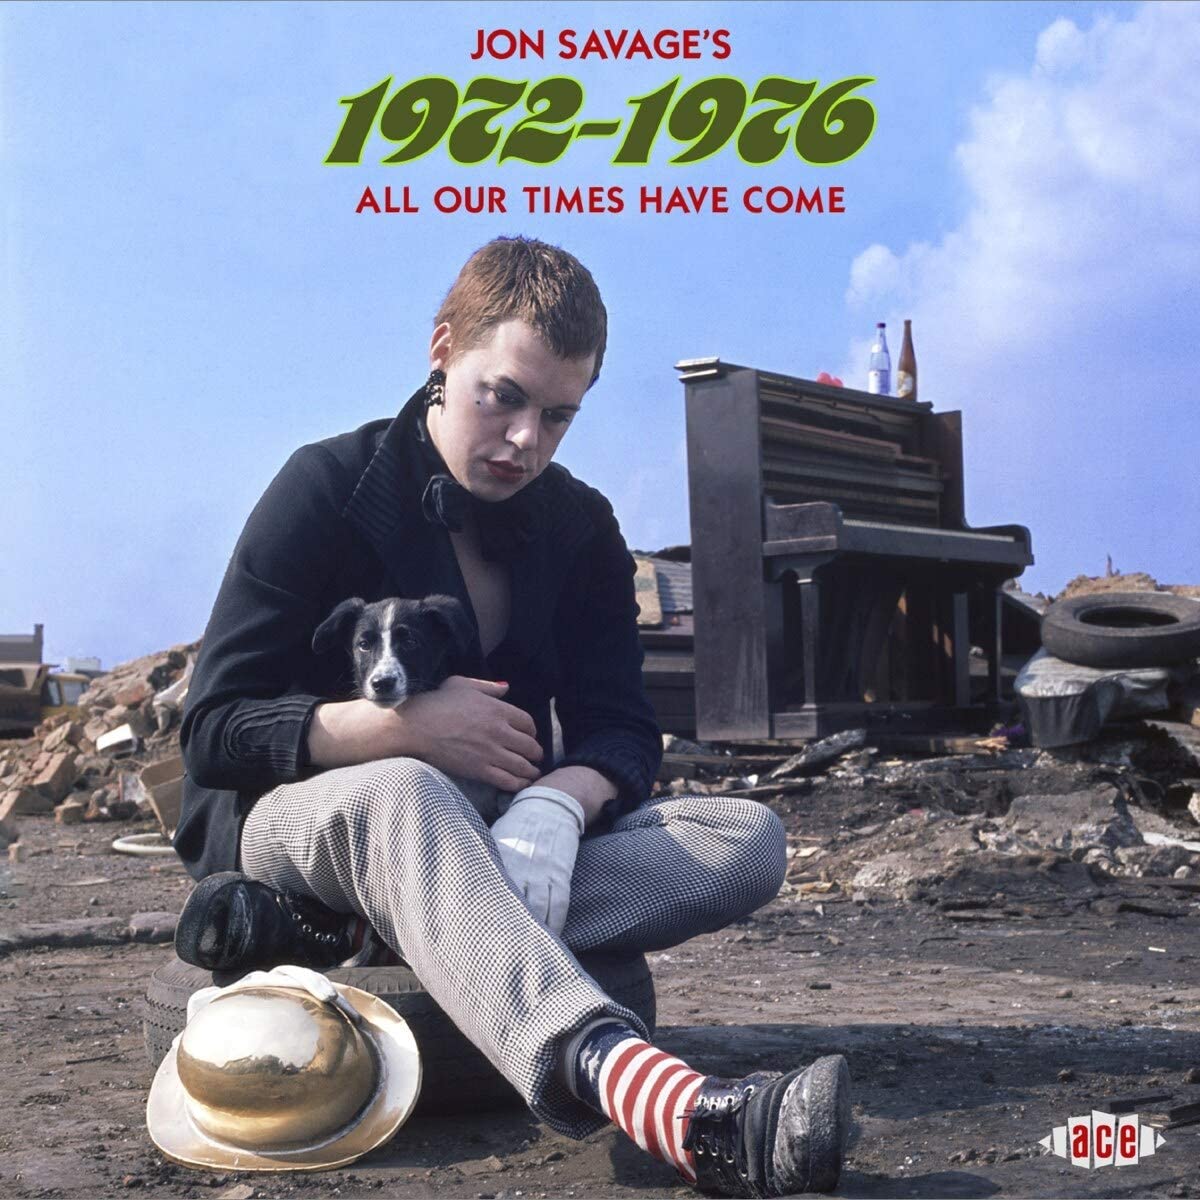 Jon Savage’s 1972-1976 - All Our Times Have Come